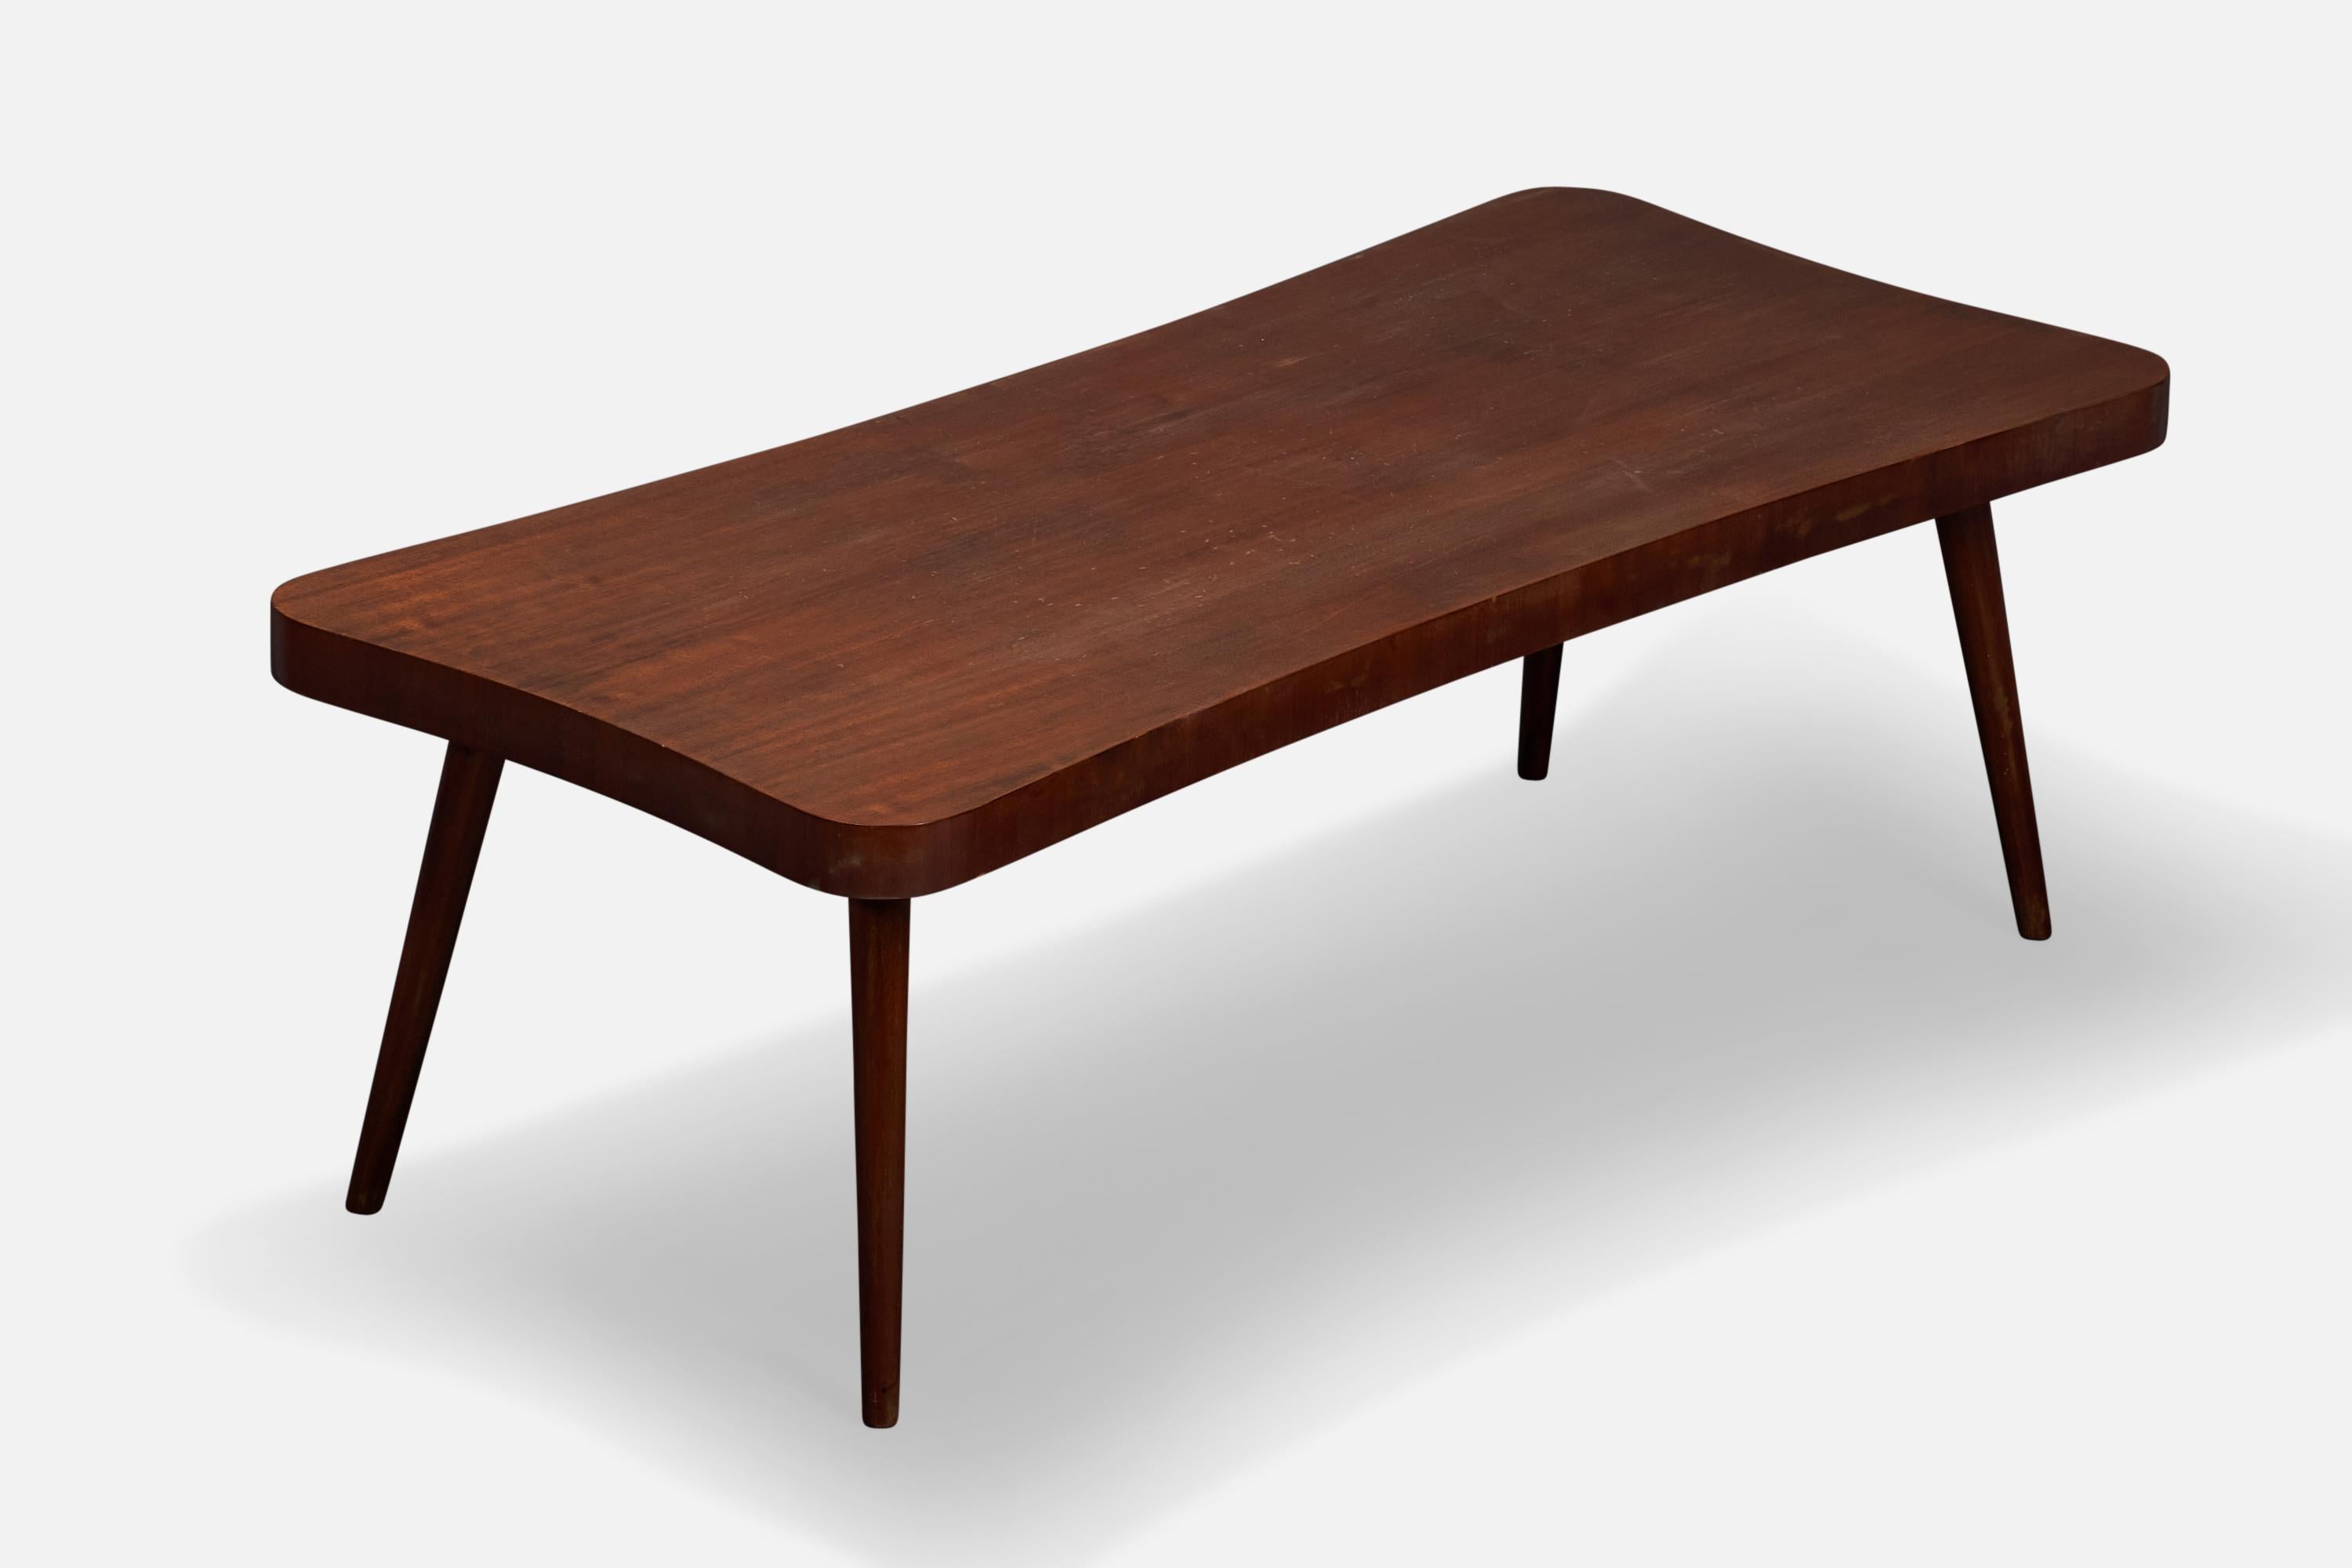 An organic walnut coffee table designed and produced in the US, 1940s.